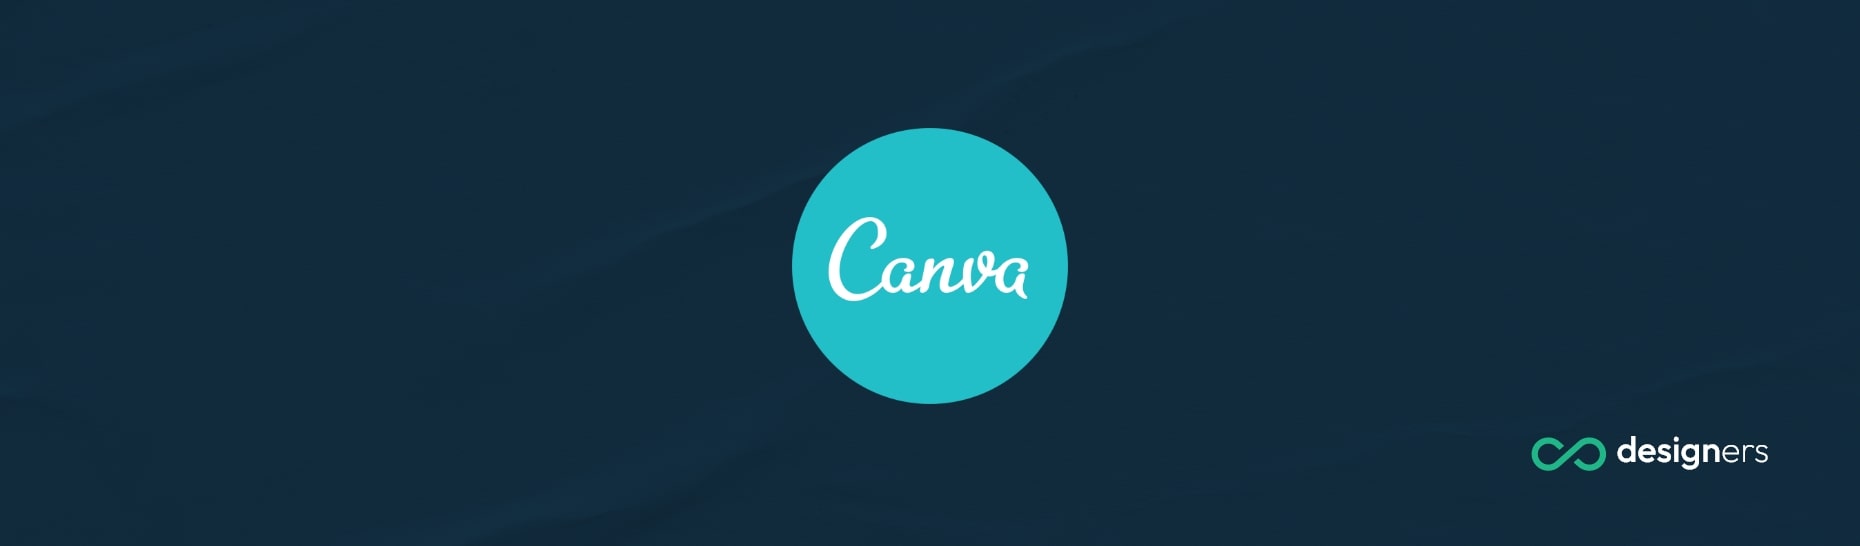 How Do You Create a Notebook on Canva?